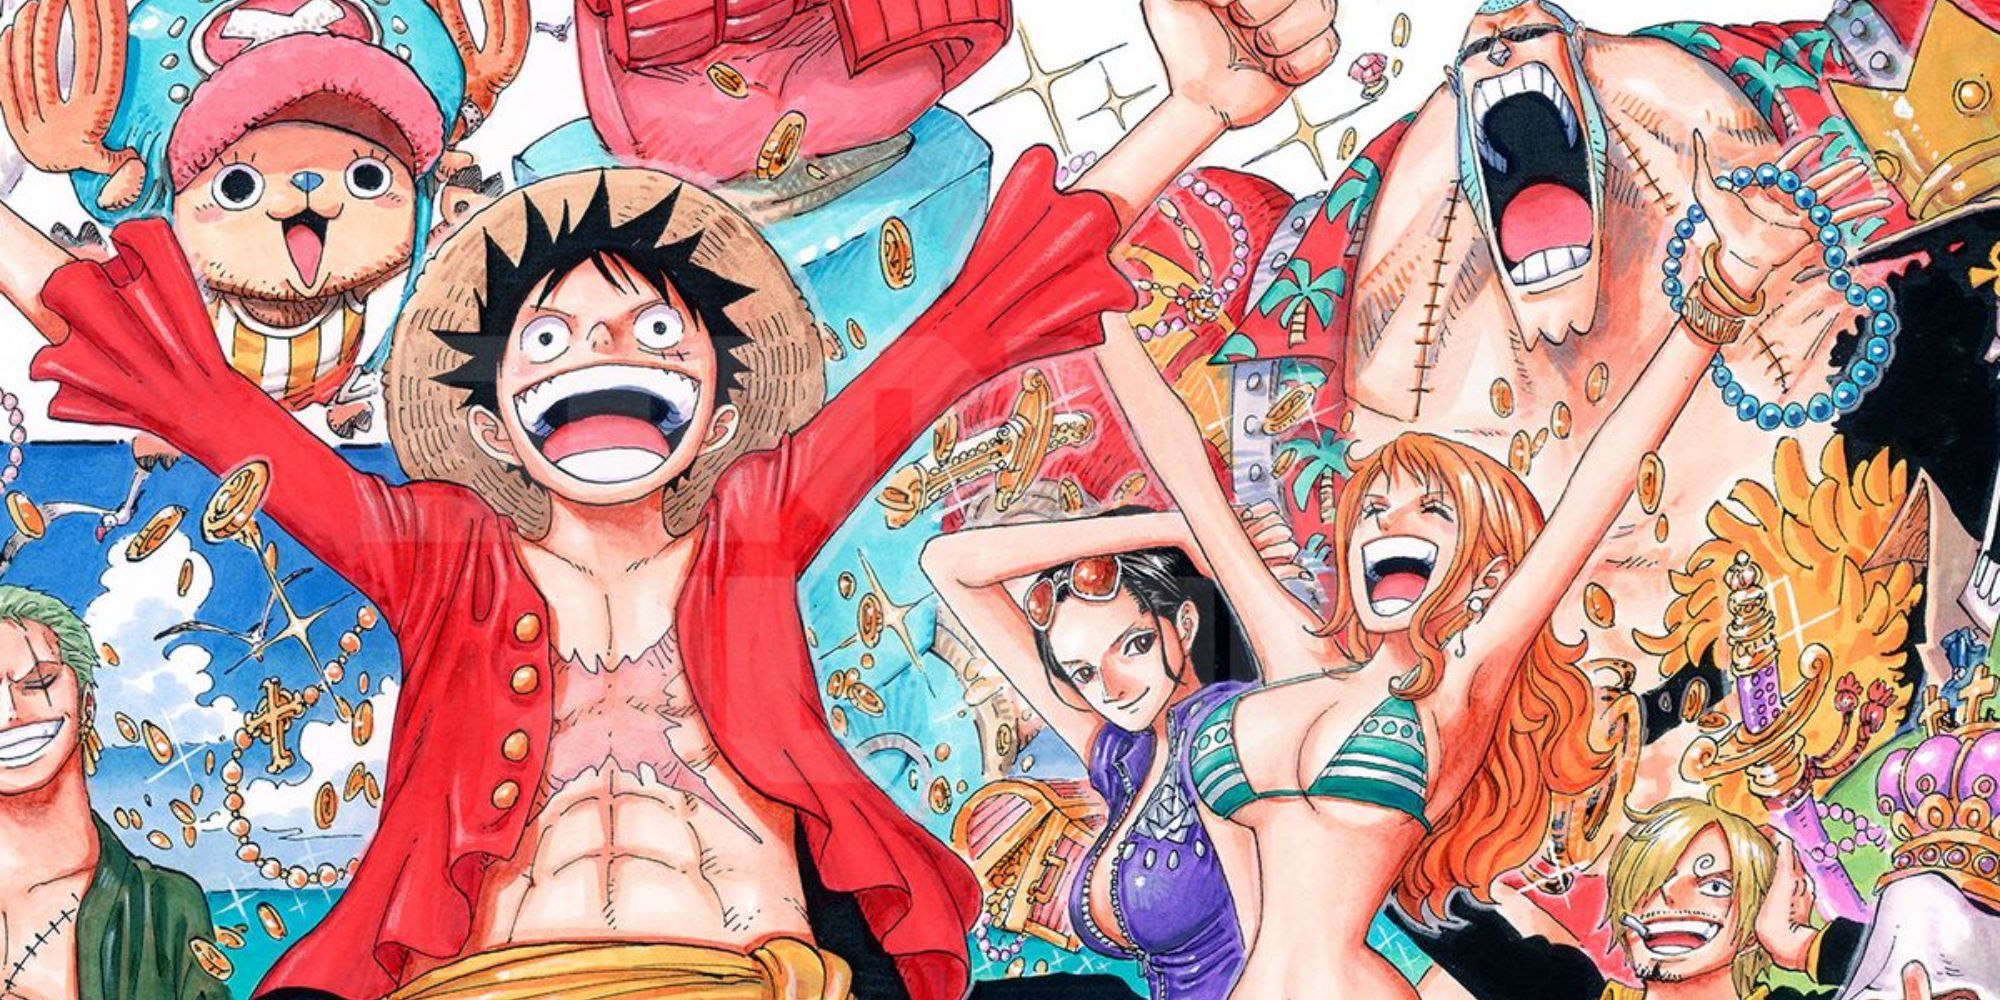 The Straw Hat crew in One Piece.